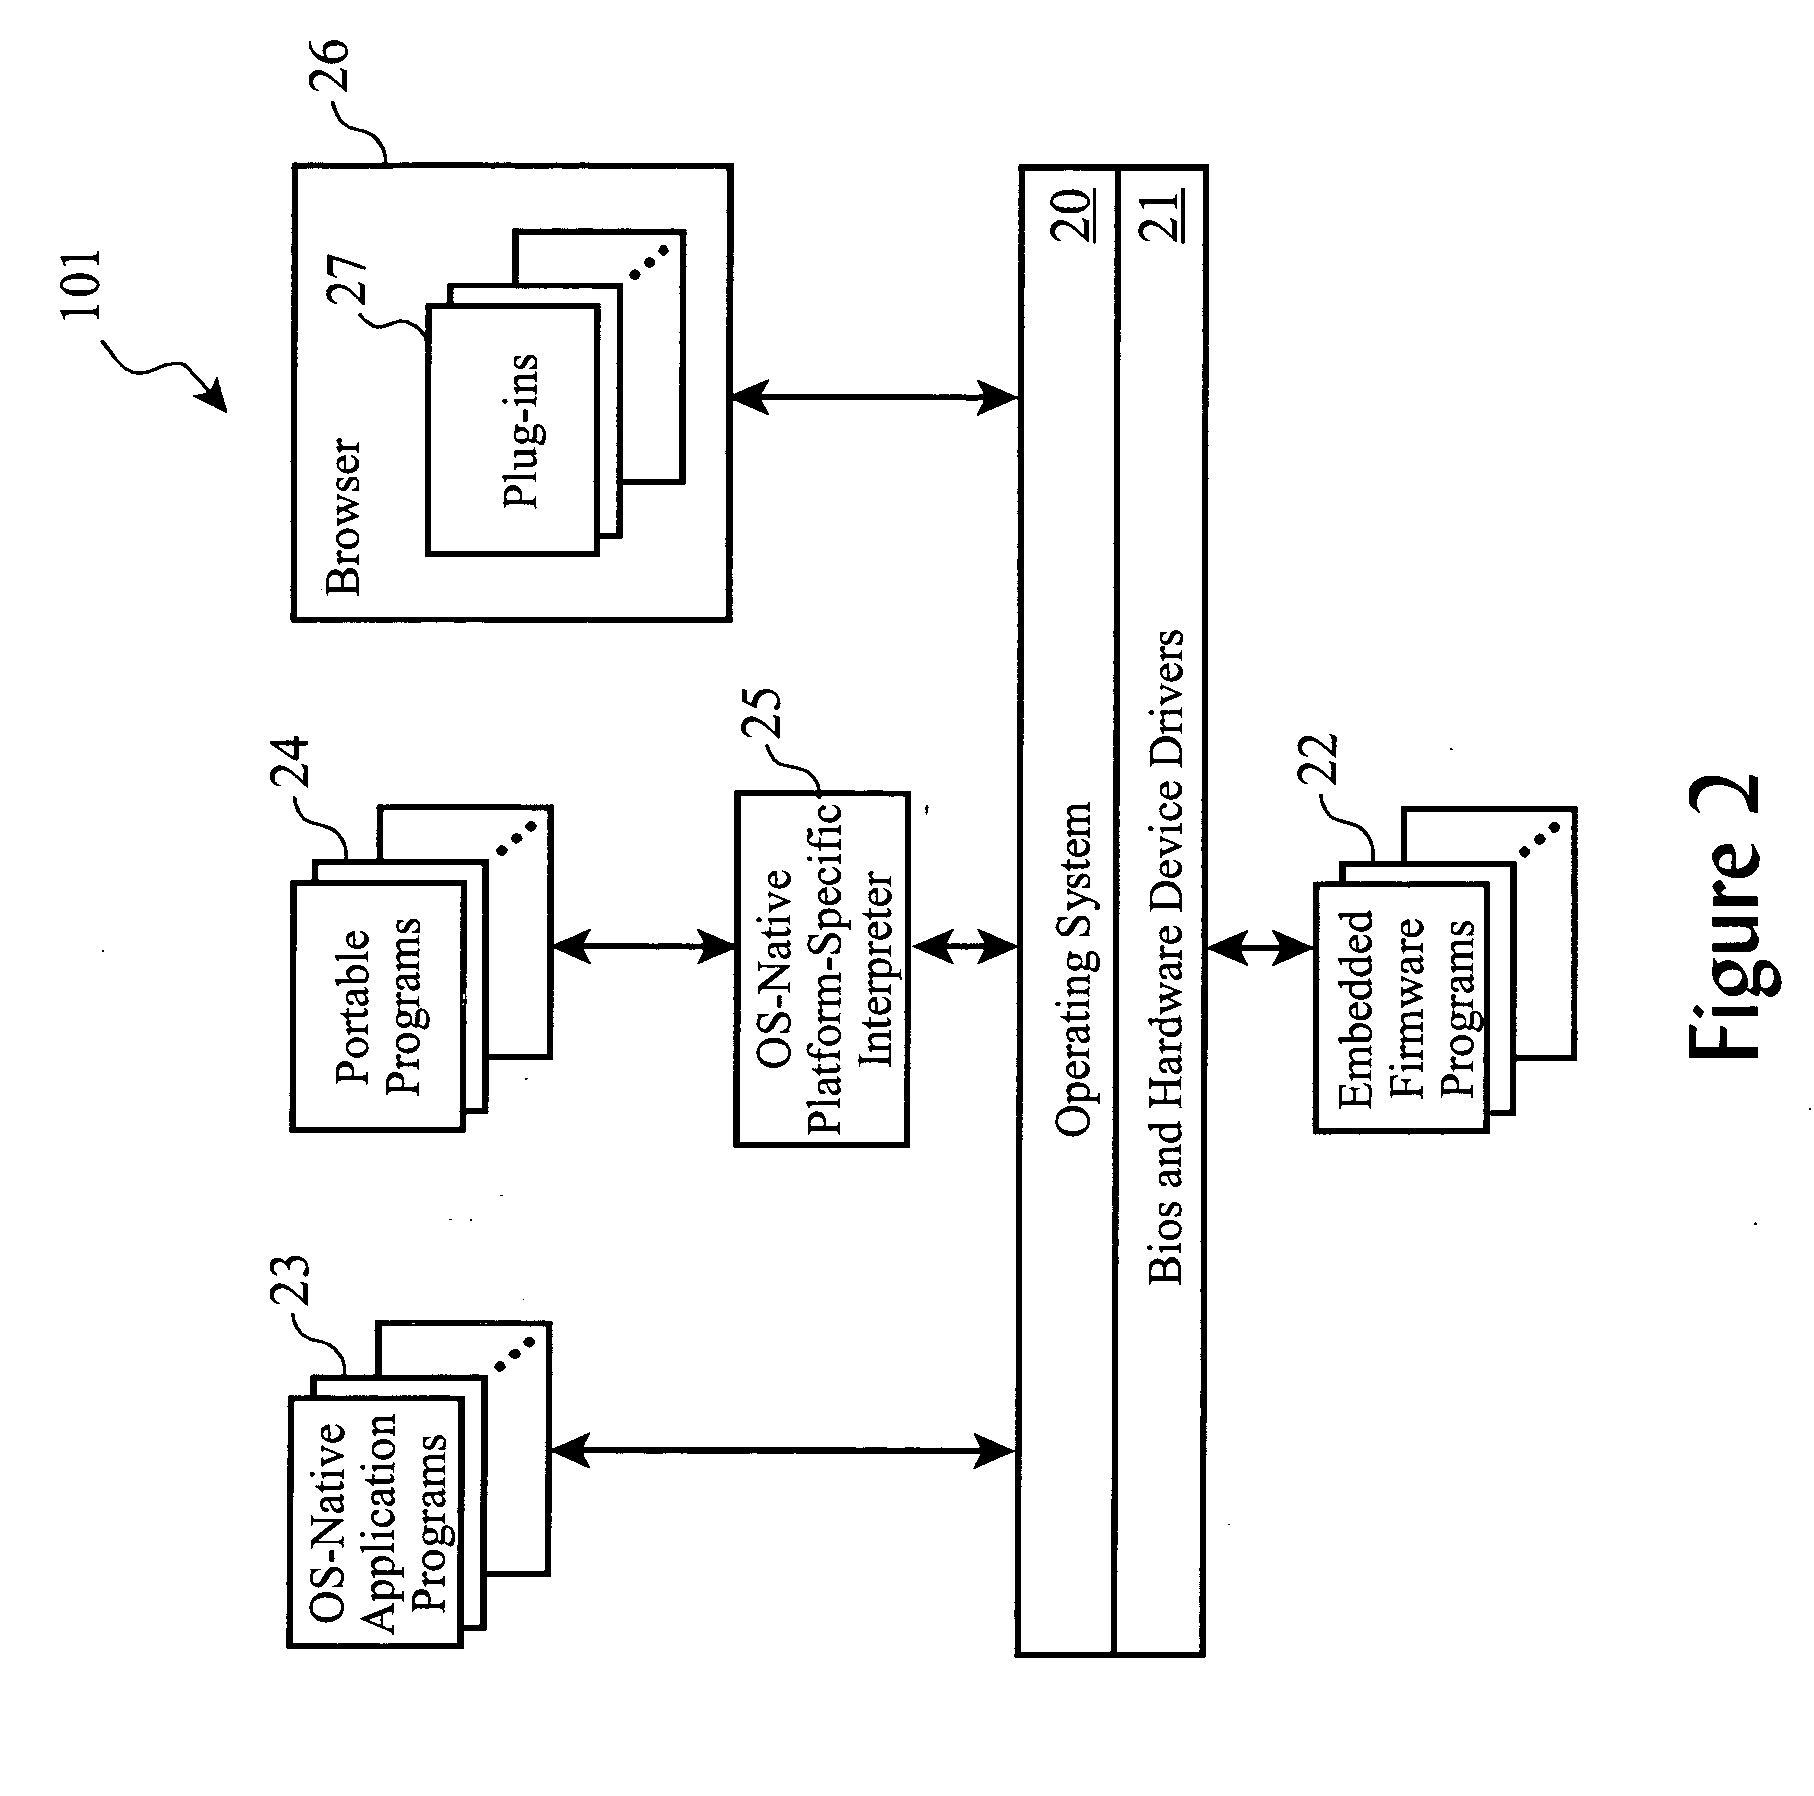 System and method for identification of discrepancies in actual and expected inventories in computing environment having multiple provisioning orchestration server pool boundaries